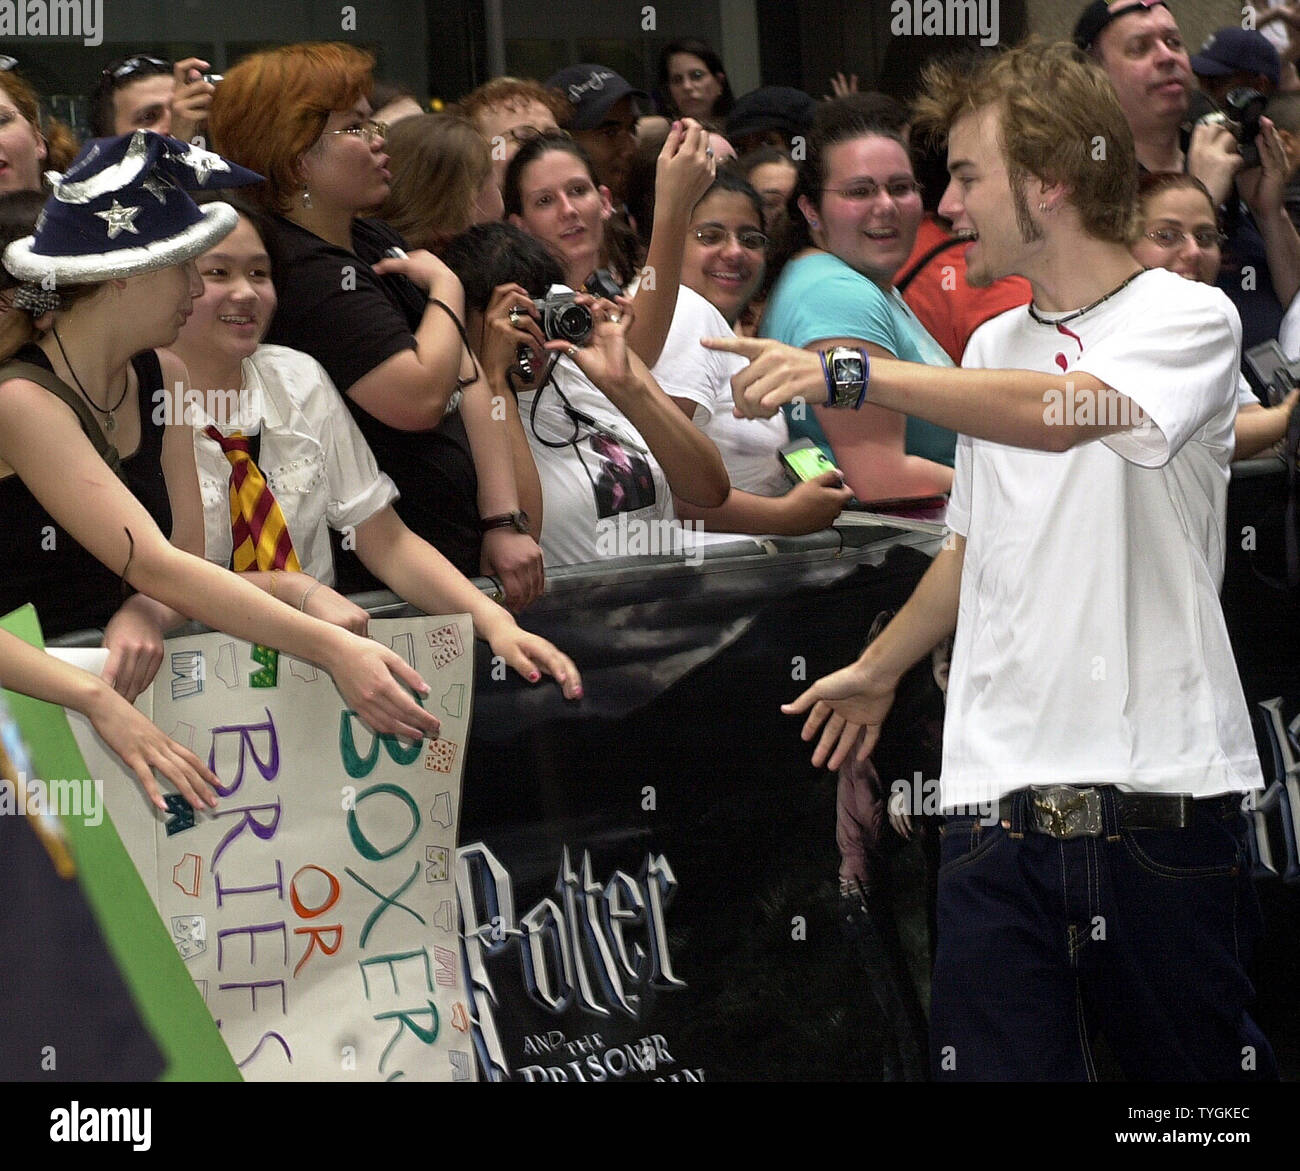 Actor David Gallagher of the tv series 7th Heaven greets Harry Potter fans on May 23, 2004 while attending  the US premiere of the film 'Harry Potter and the Prisoner of Azkaban' at New York's Radio City Music Hall. (UPI Photo/Ezio Petersen) Stock Photo